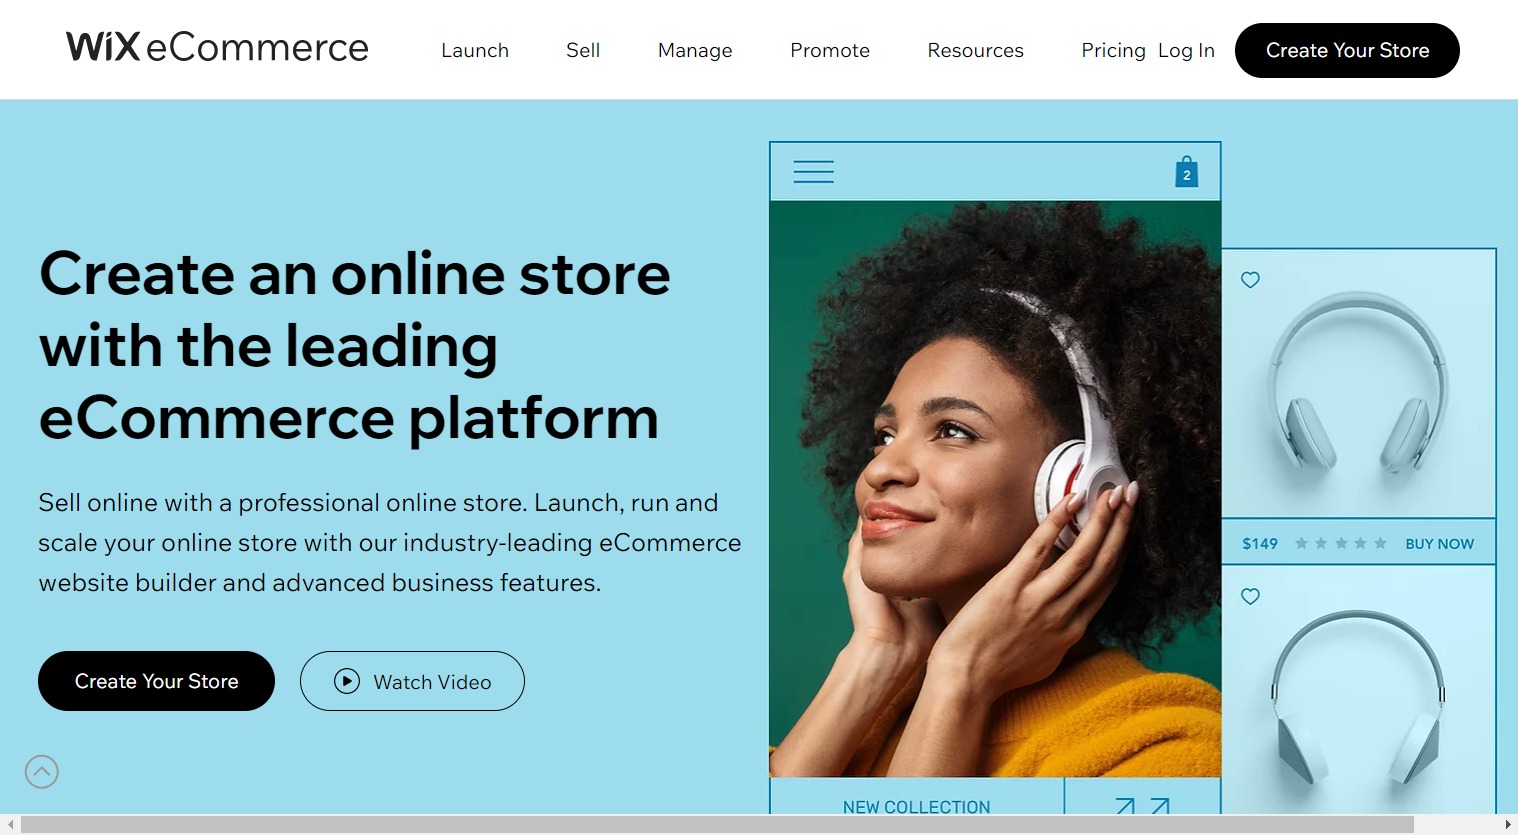 Wix eCommerce - Create an online store with the leading eCommerce platform